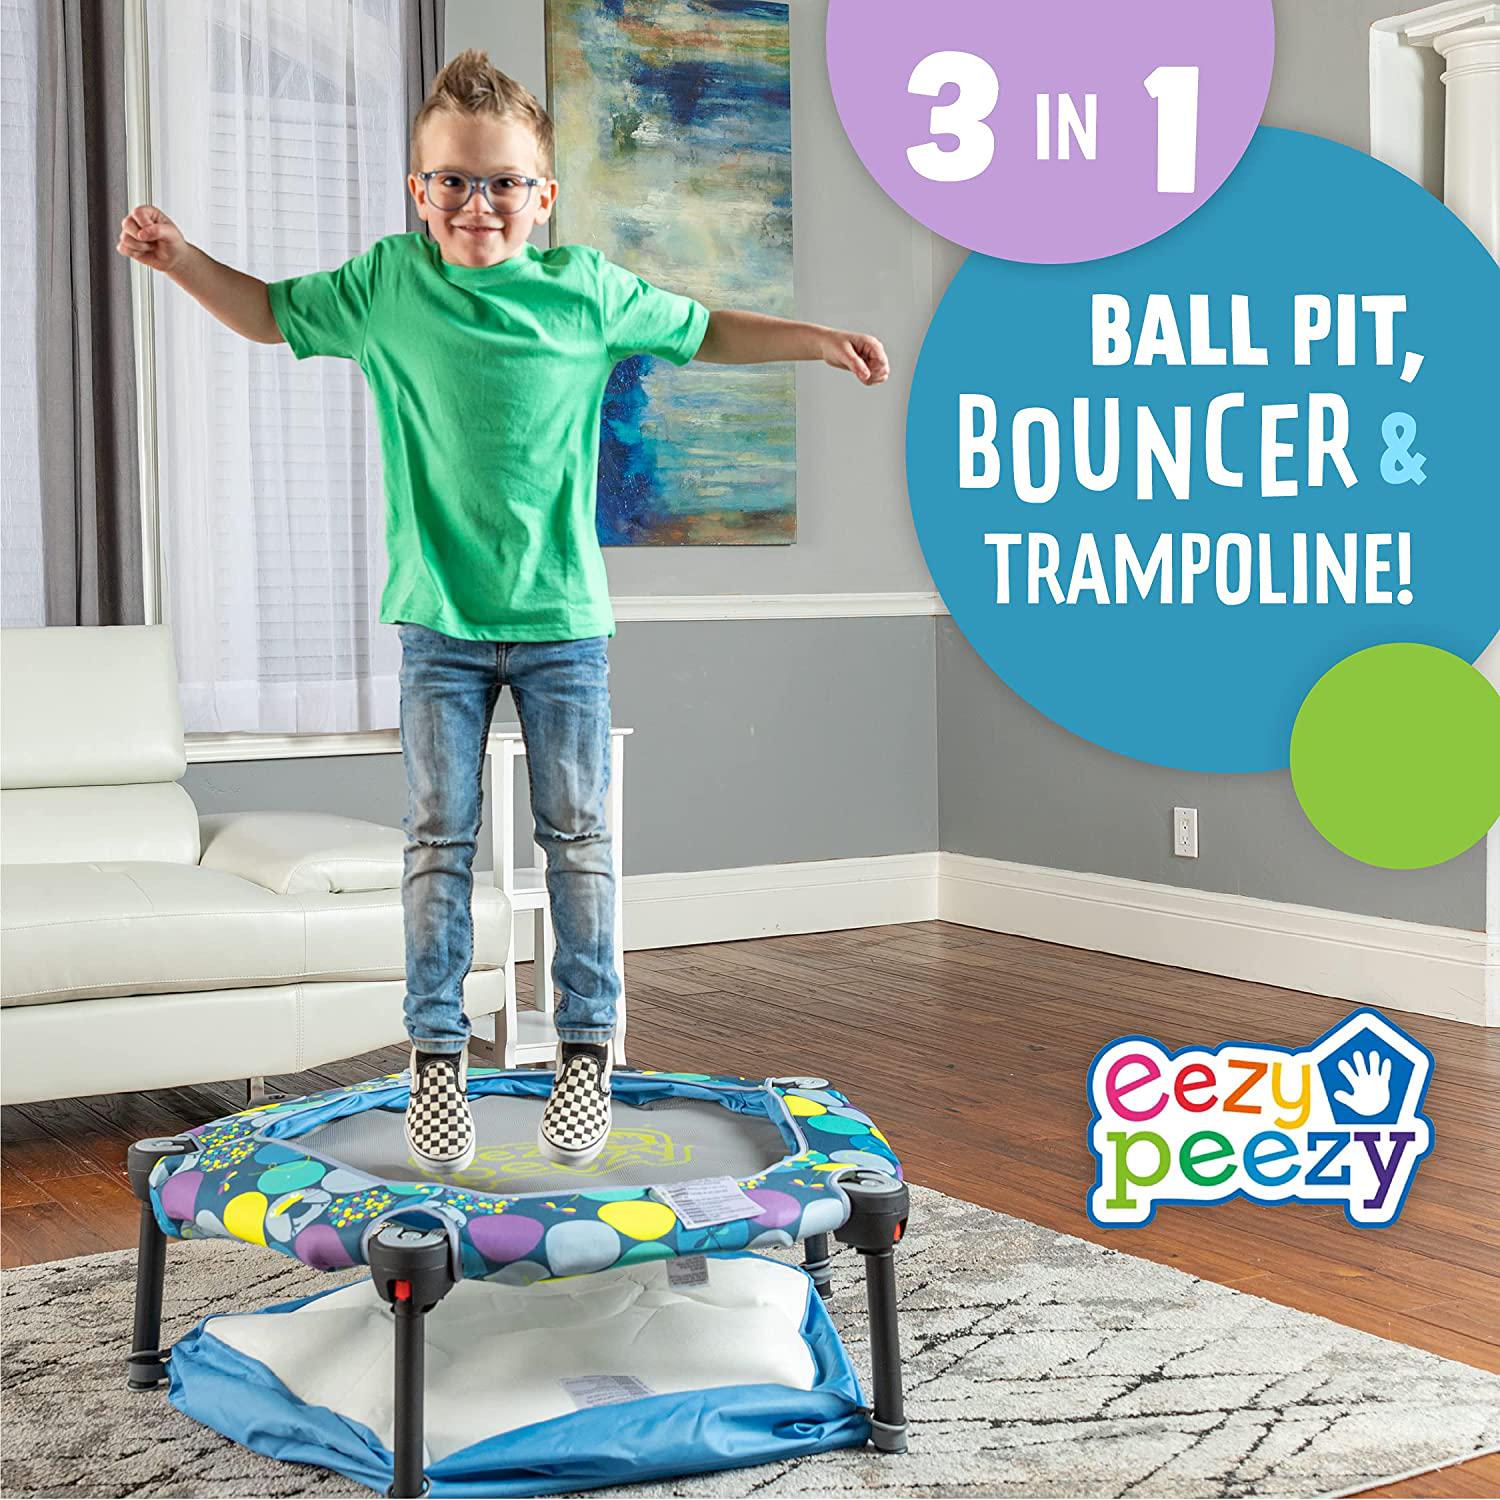 Eezy Peezy, Eezy Peezy 3 in 1 Folding Ball Pit and Trampoline - Ball Pit Tent and Trampoline with Handle - Ages 10 Months to 5 Years, Multi, One Size, TM700